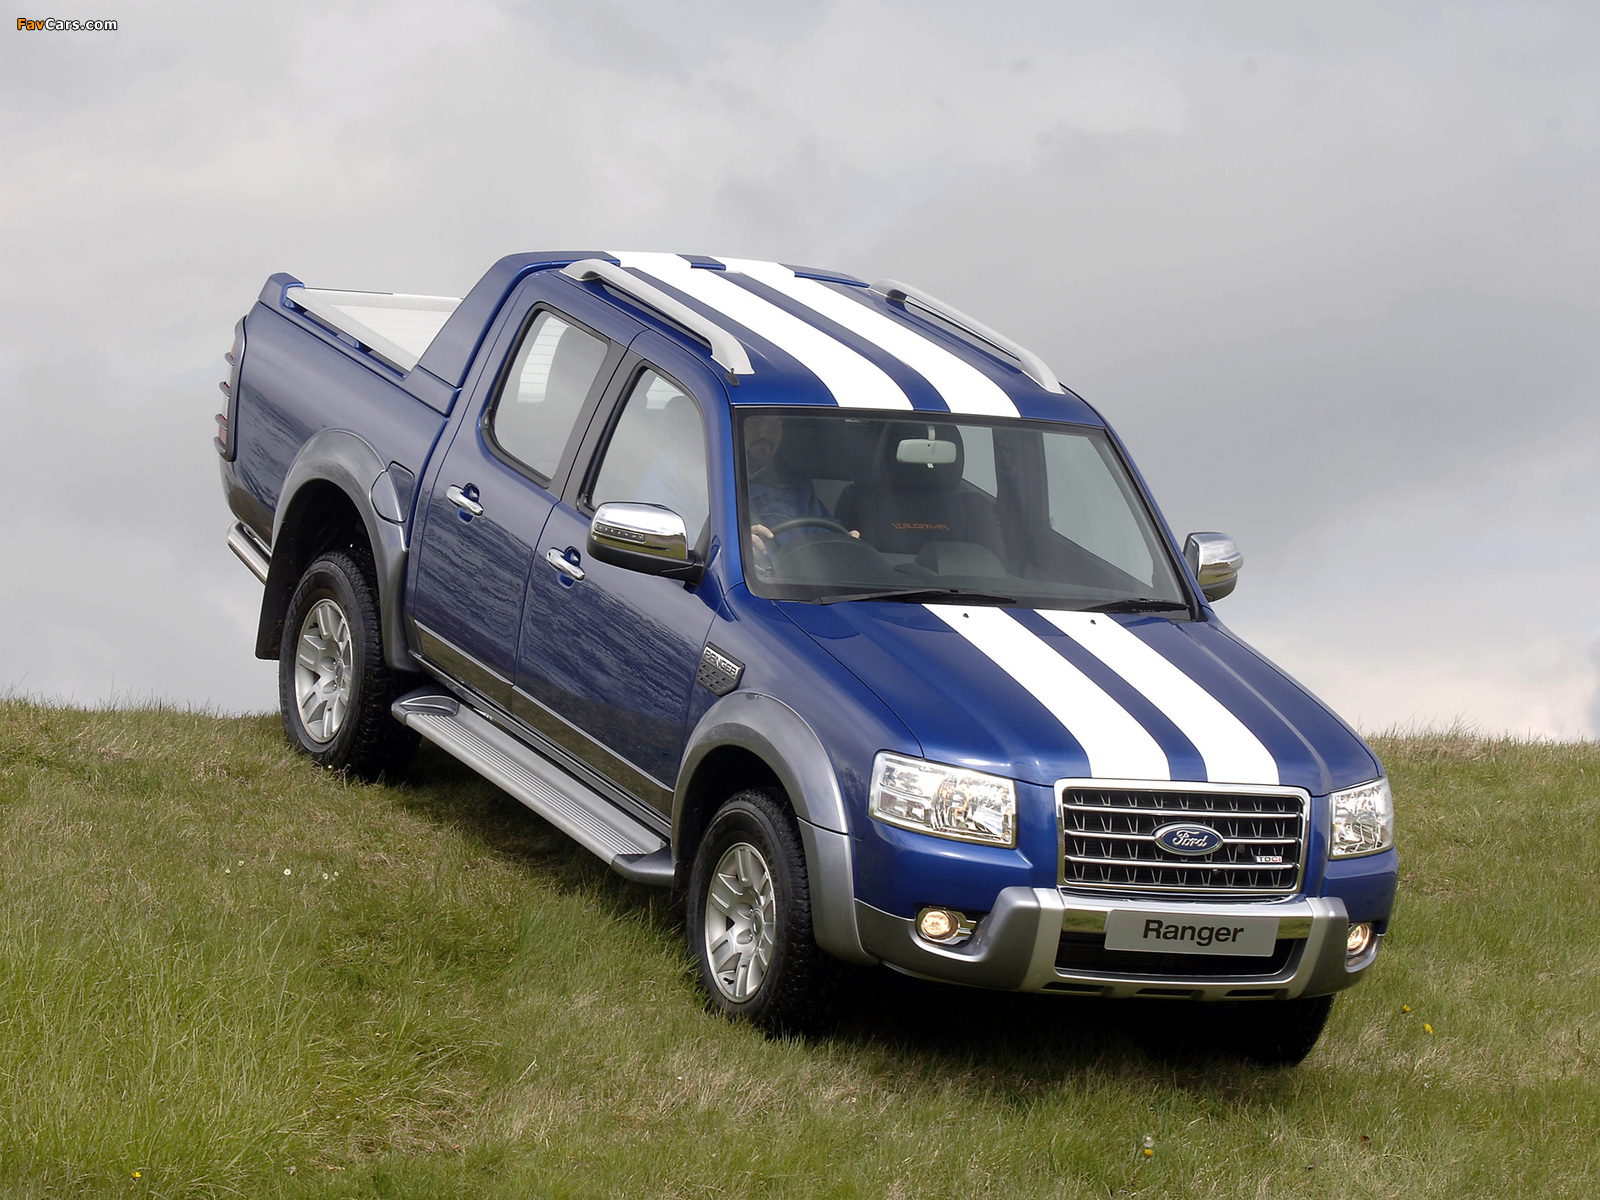 Ford Ranger Wildtrak Le Mans Edition 2008 pictures (1600 x 1200)